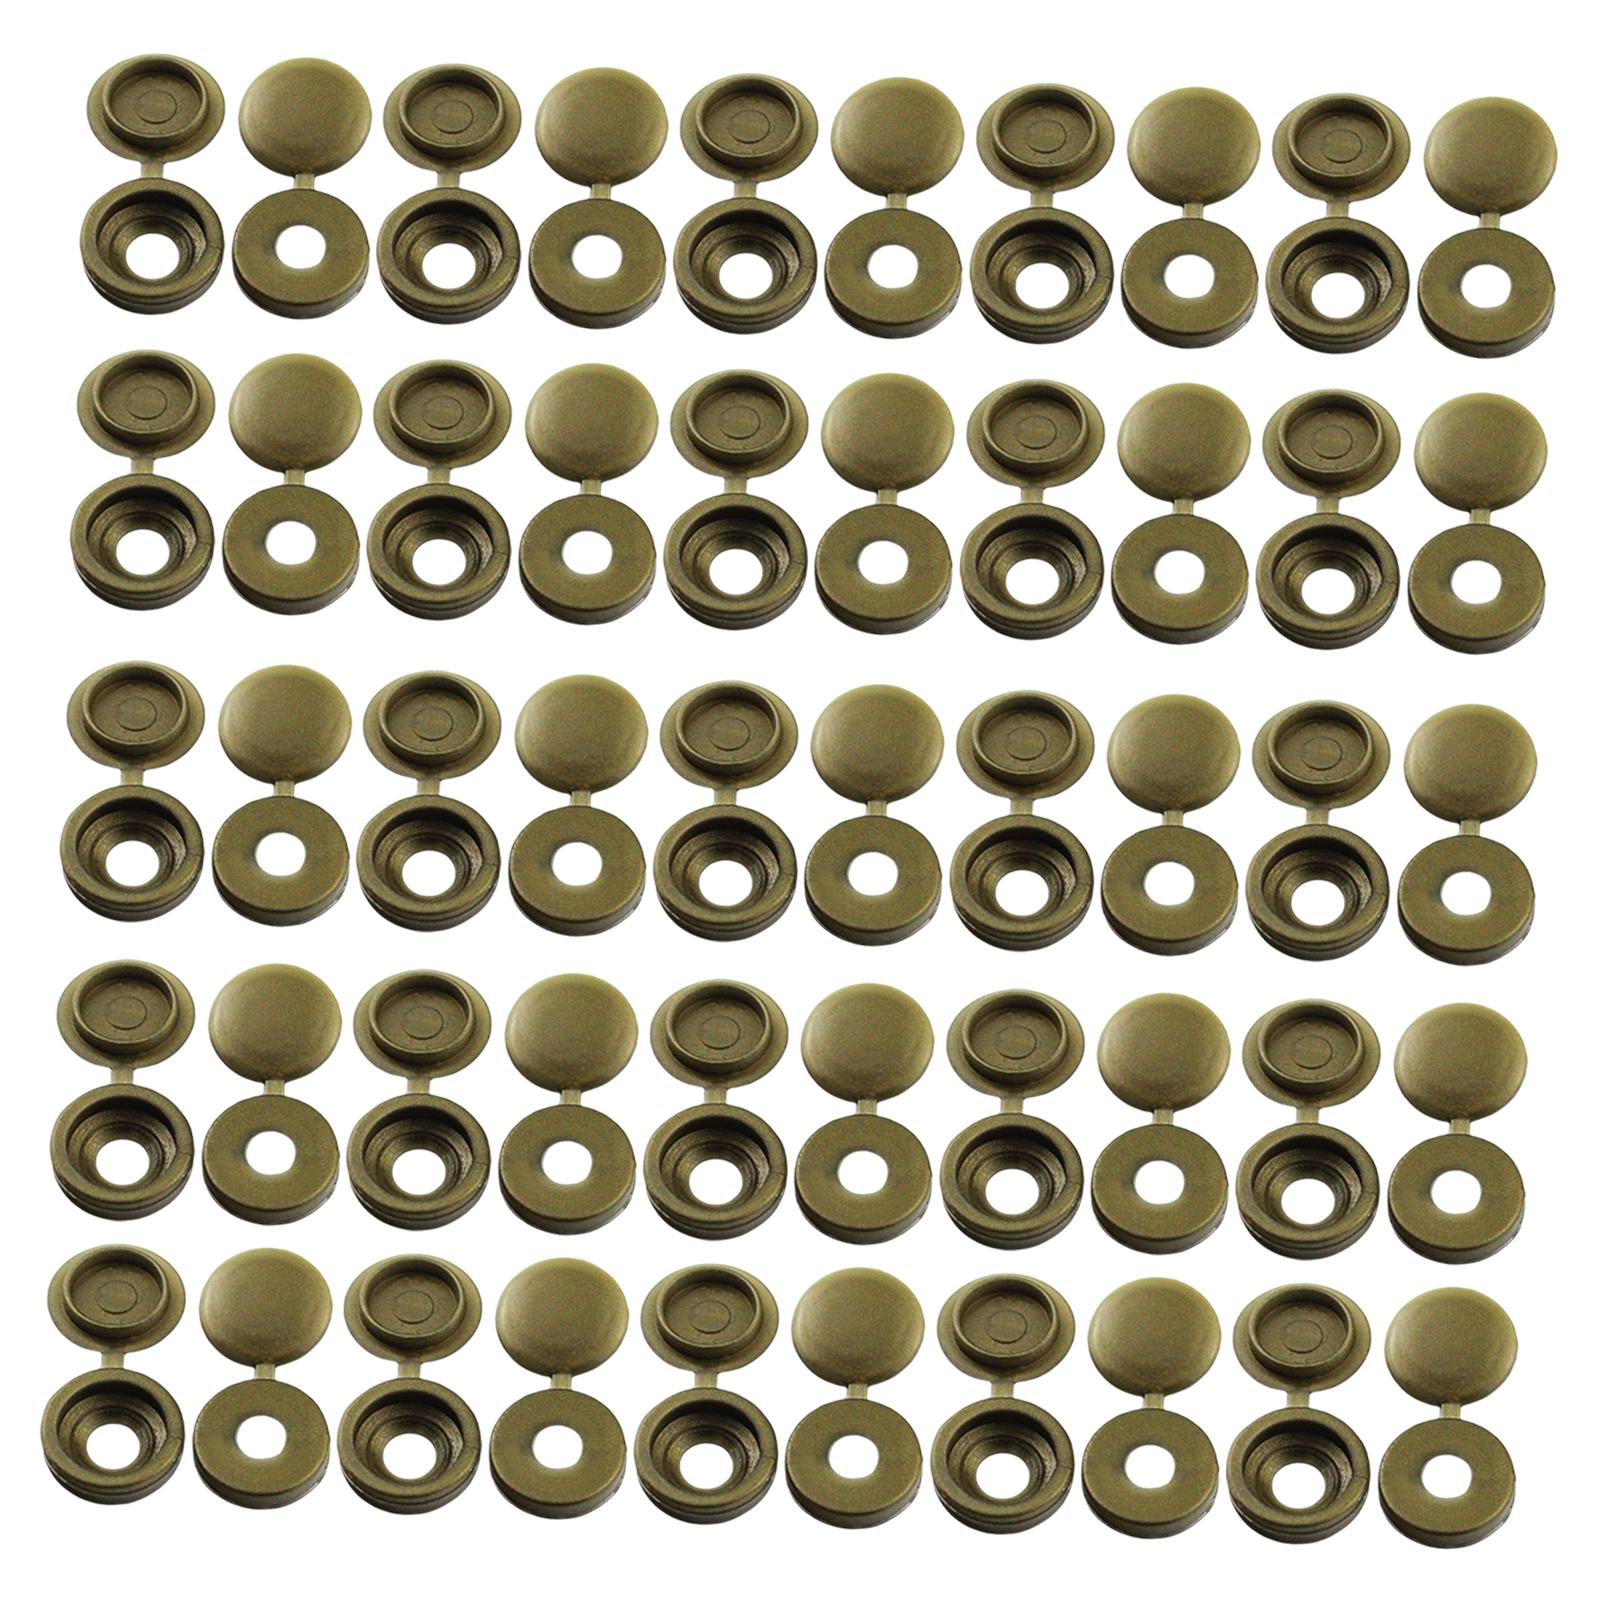 100 Pieces Screw Covers, Practical Screws Caps for Replacement Tools Yard Mocha Gold